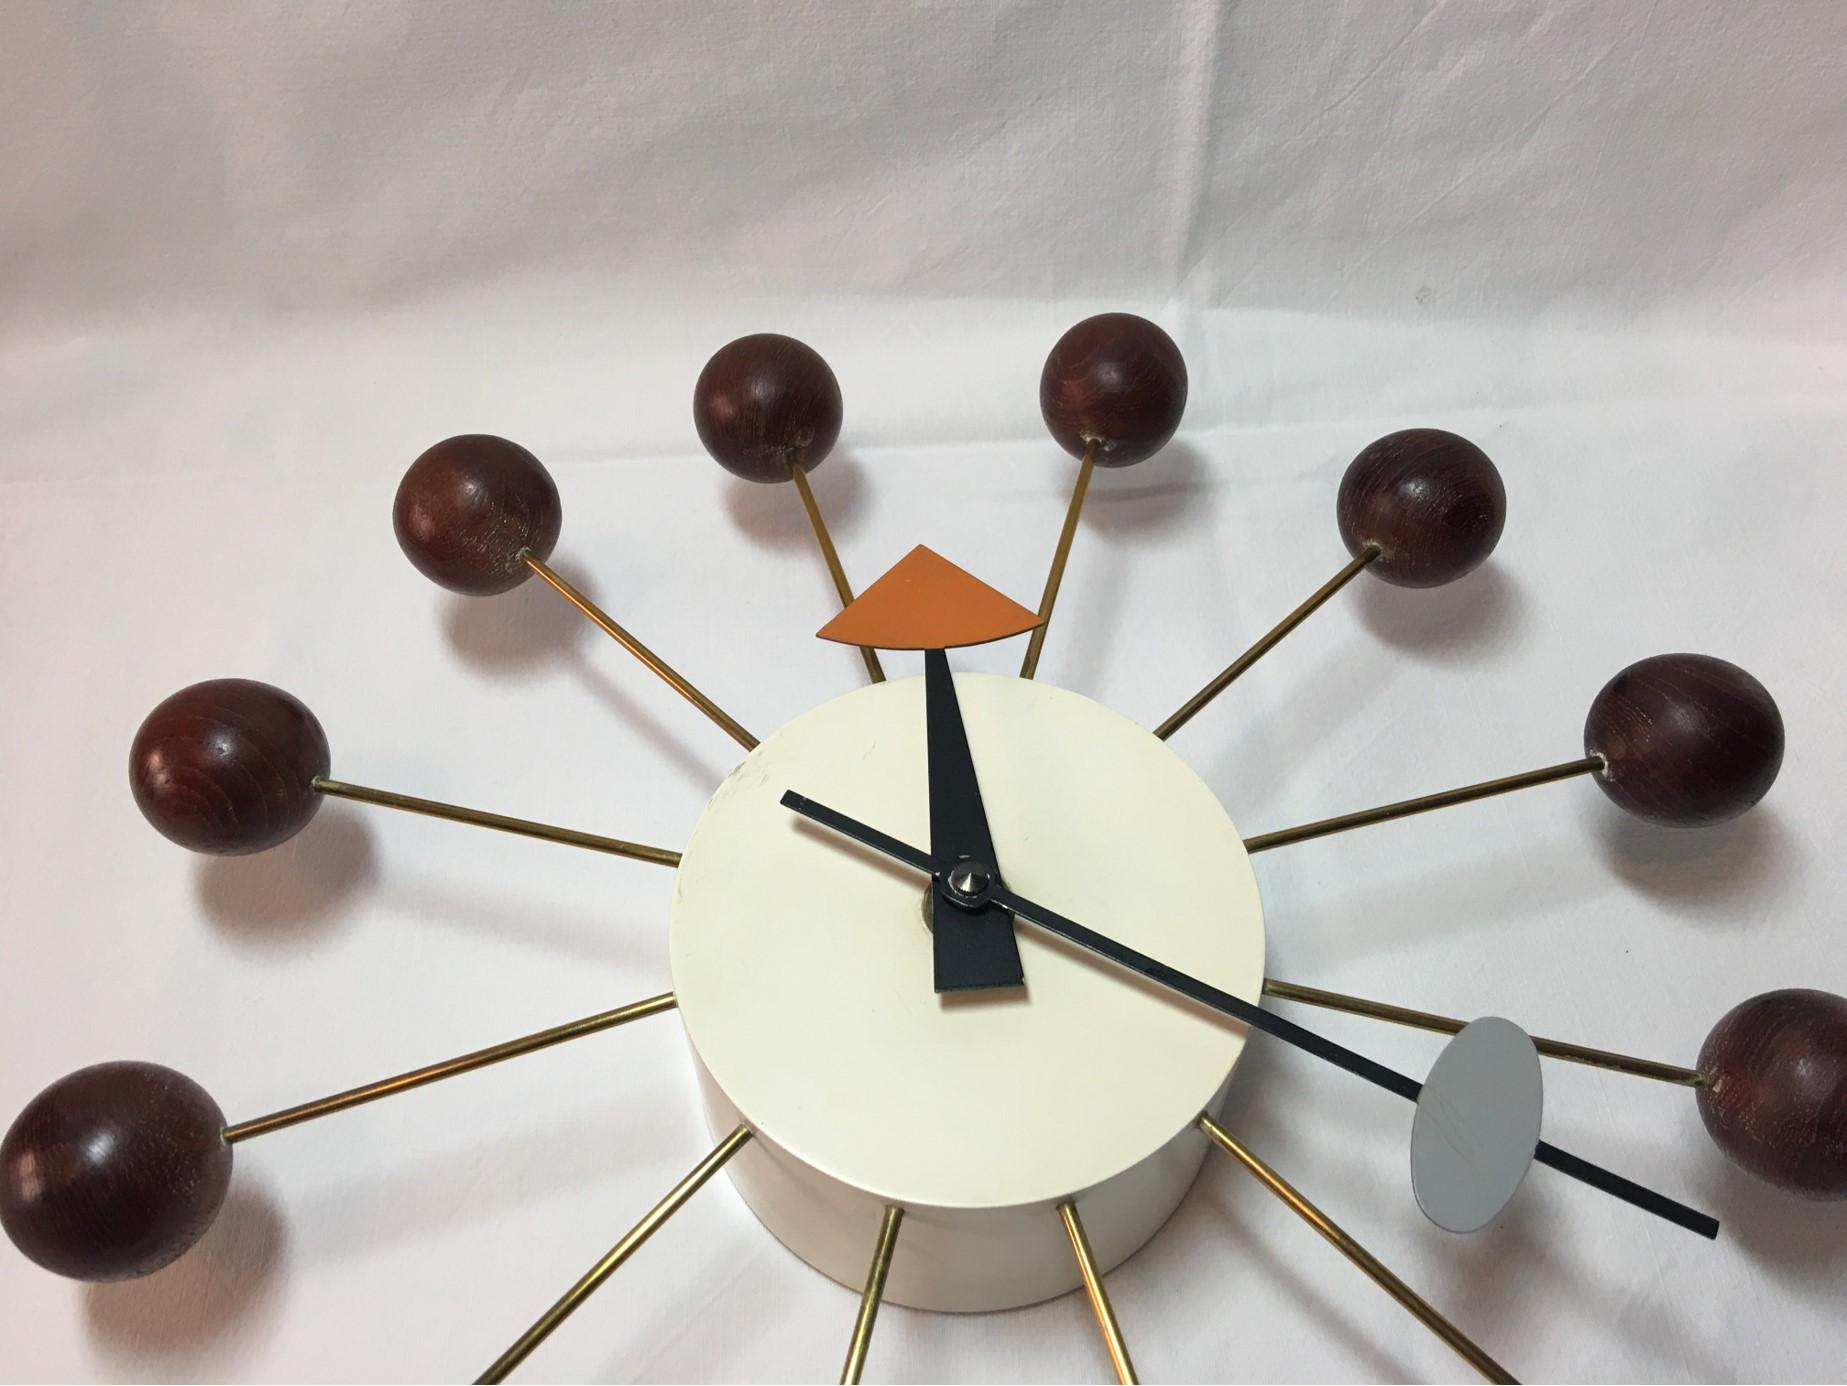 The European version of the design classic ball clock from George Nelson for Howard Miller. Manufactured in Bern Switzerland by the Fehlbaum Brothers in the 1950s. The inner Workings were replaced and restored by previous owner. Functions great.